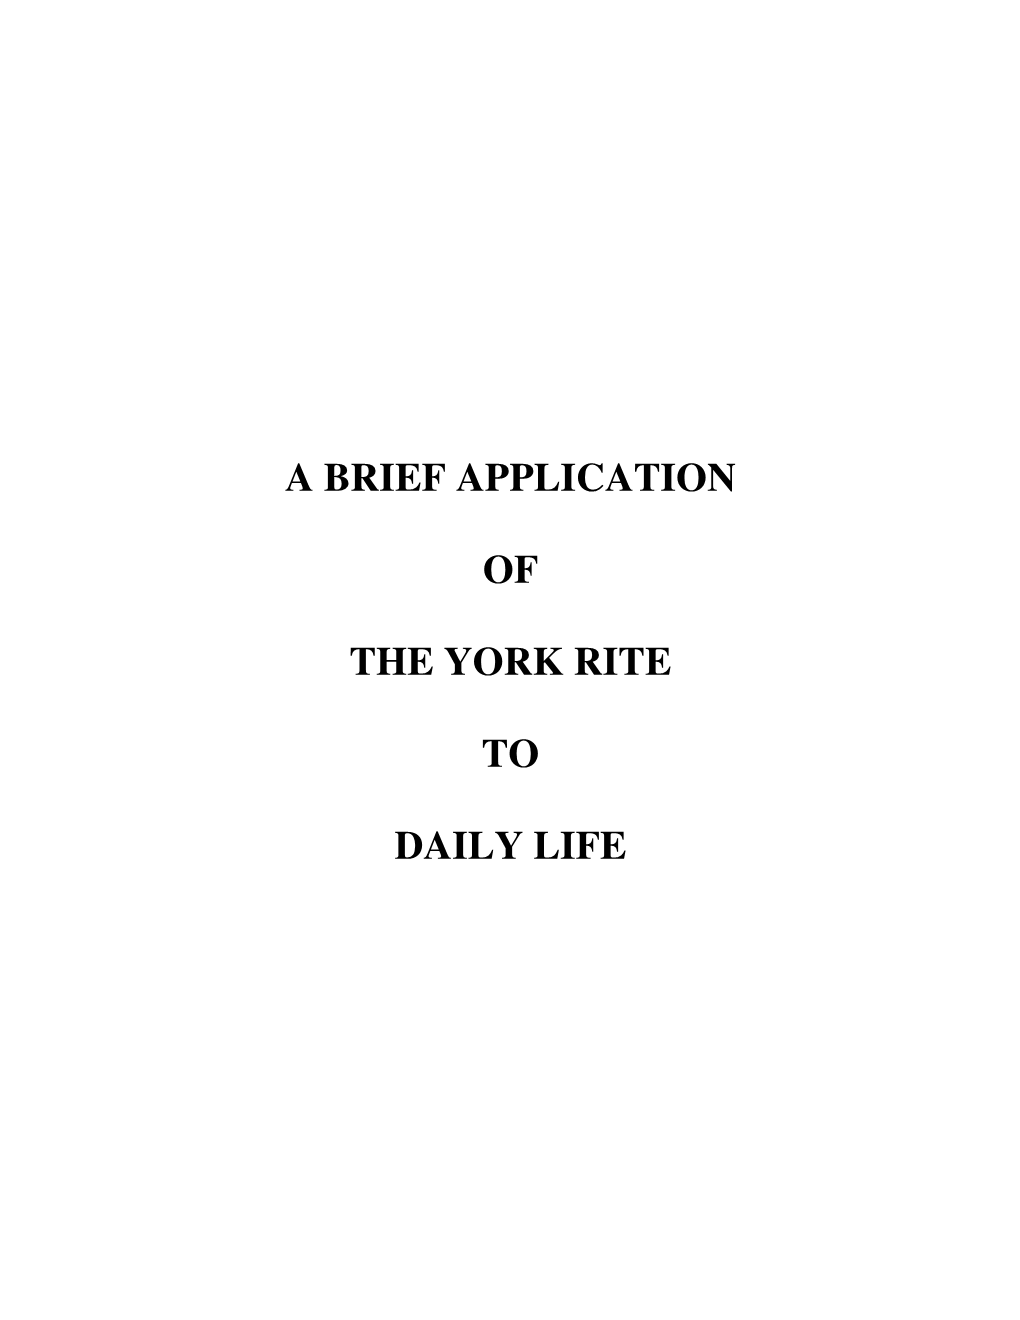 A Brief Application of the York Rite to Daily Life